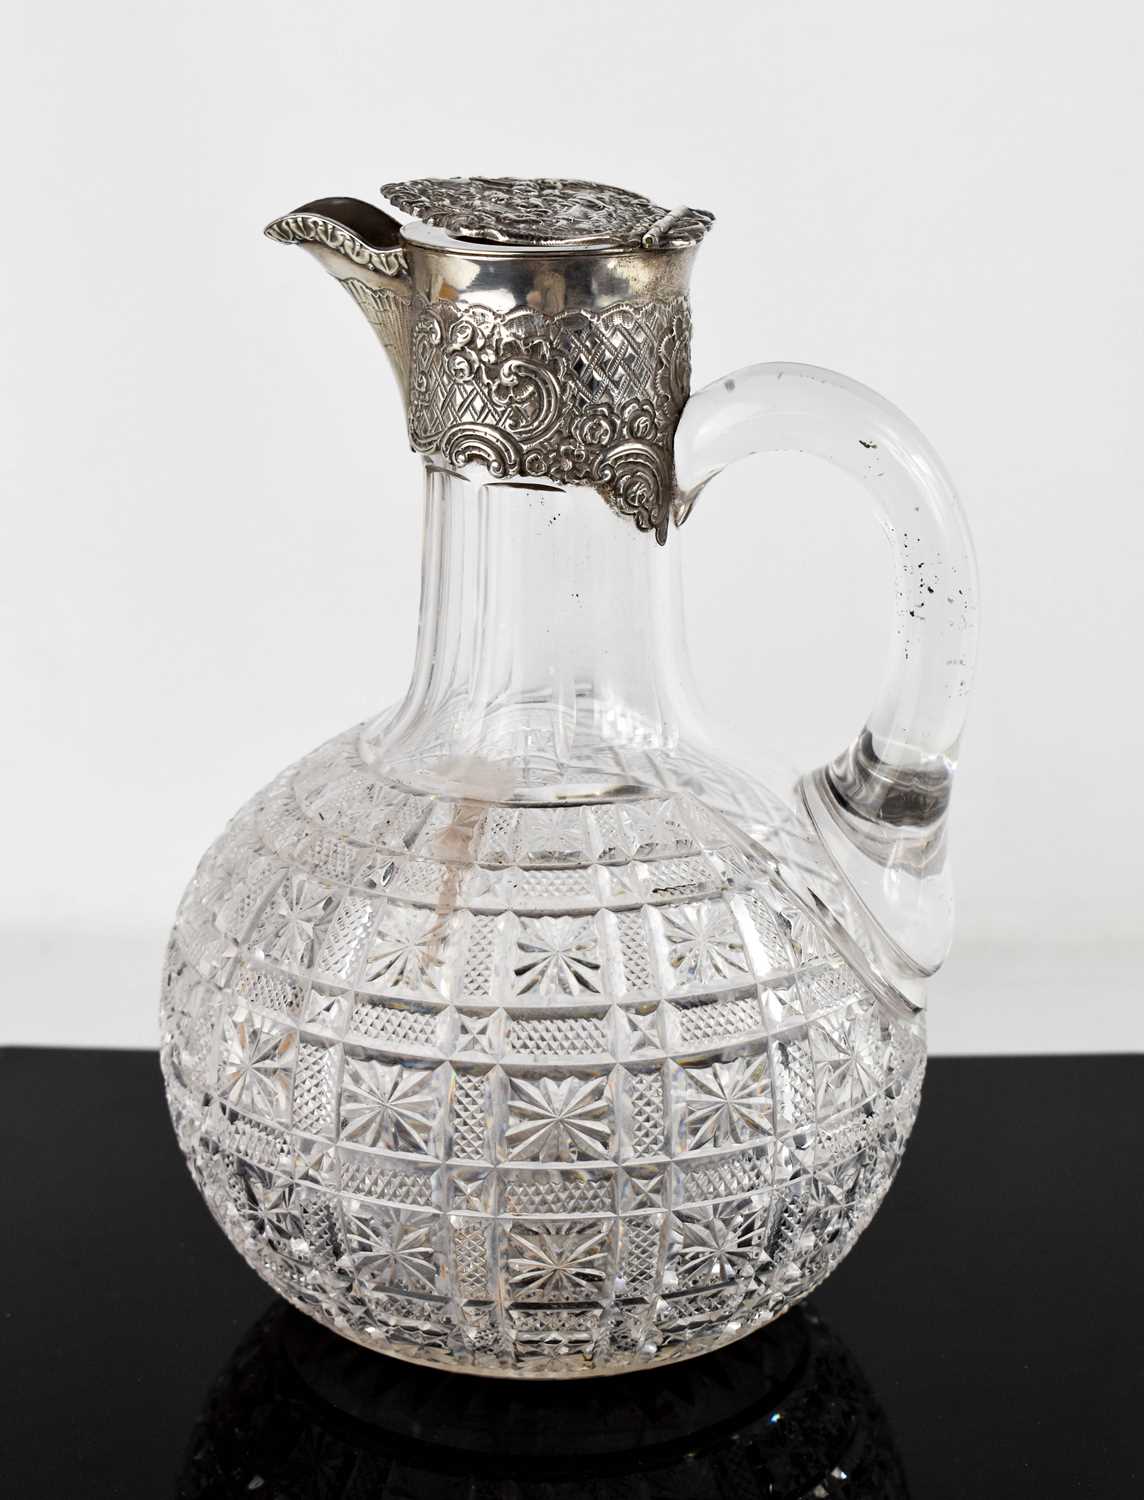 A 19th century silver and glass claret jug, with star hobnail panels, silver collar and cover